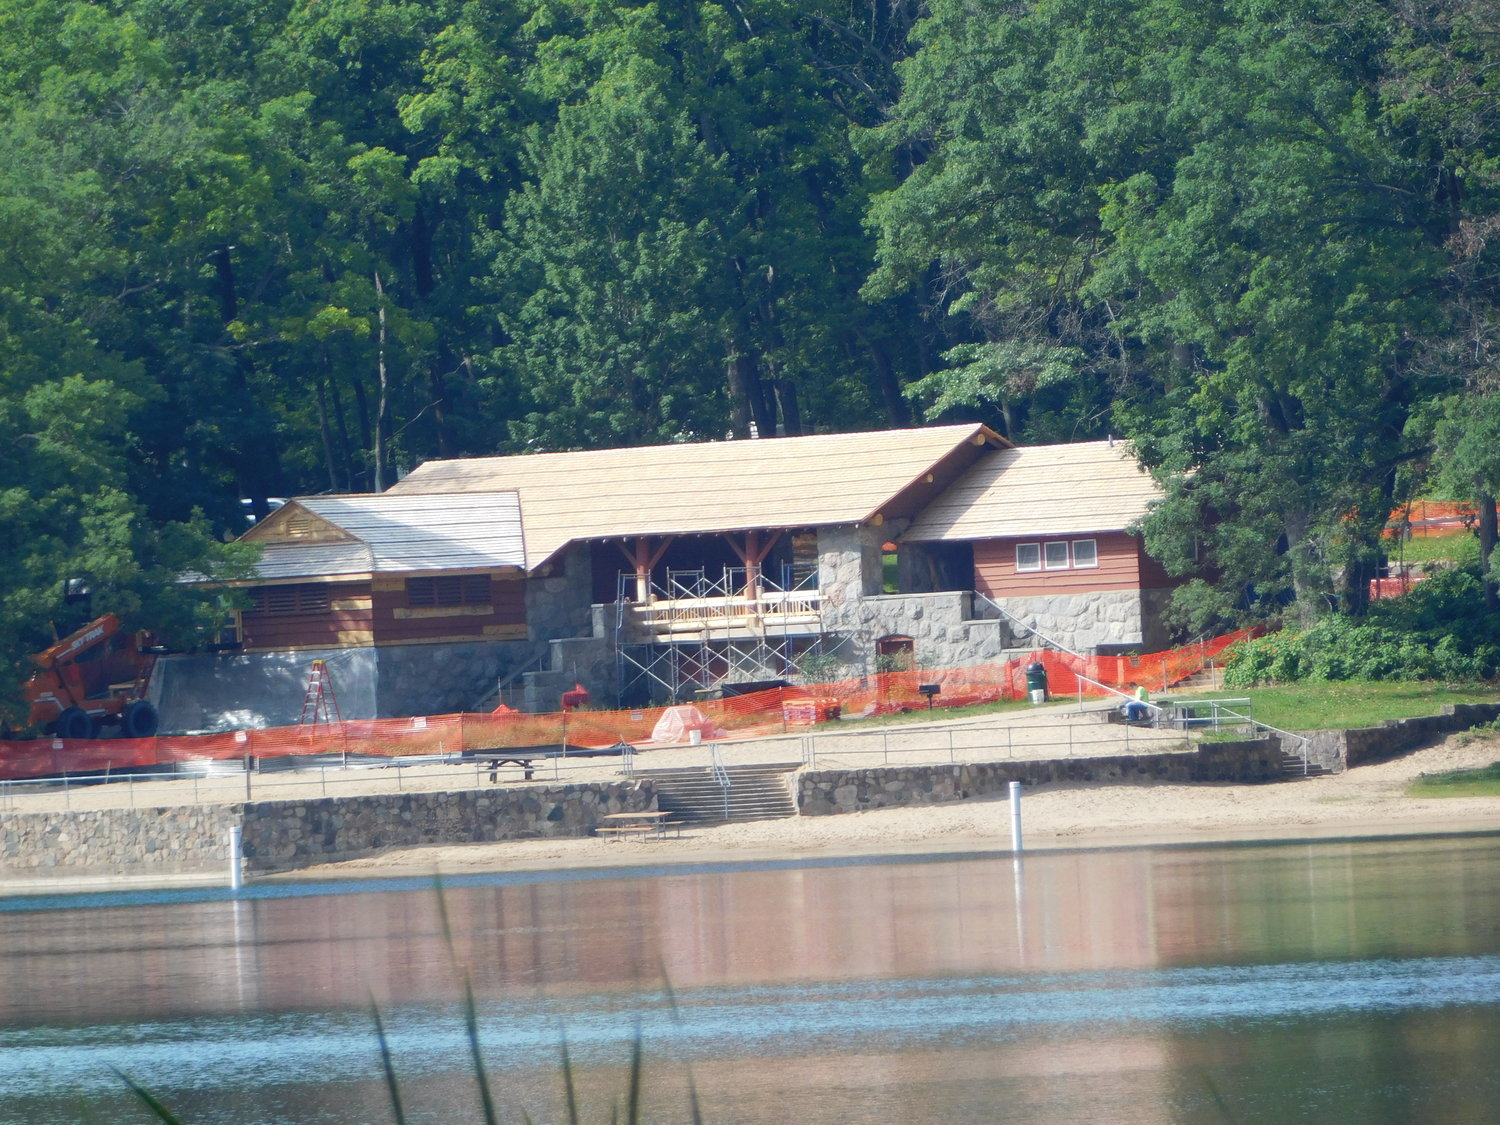 The park’s pavilion is shown July 18 in its current state of renovation, work being completed in concert with the park’s 100th anniversary of 2020.